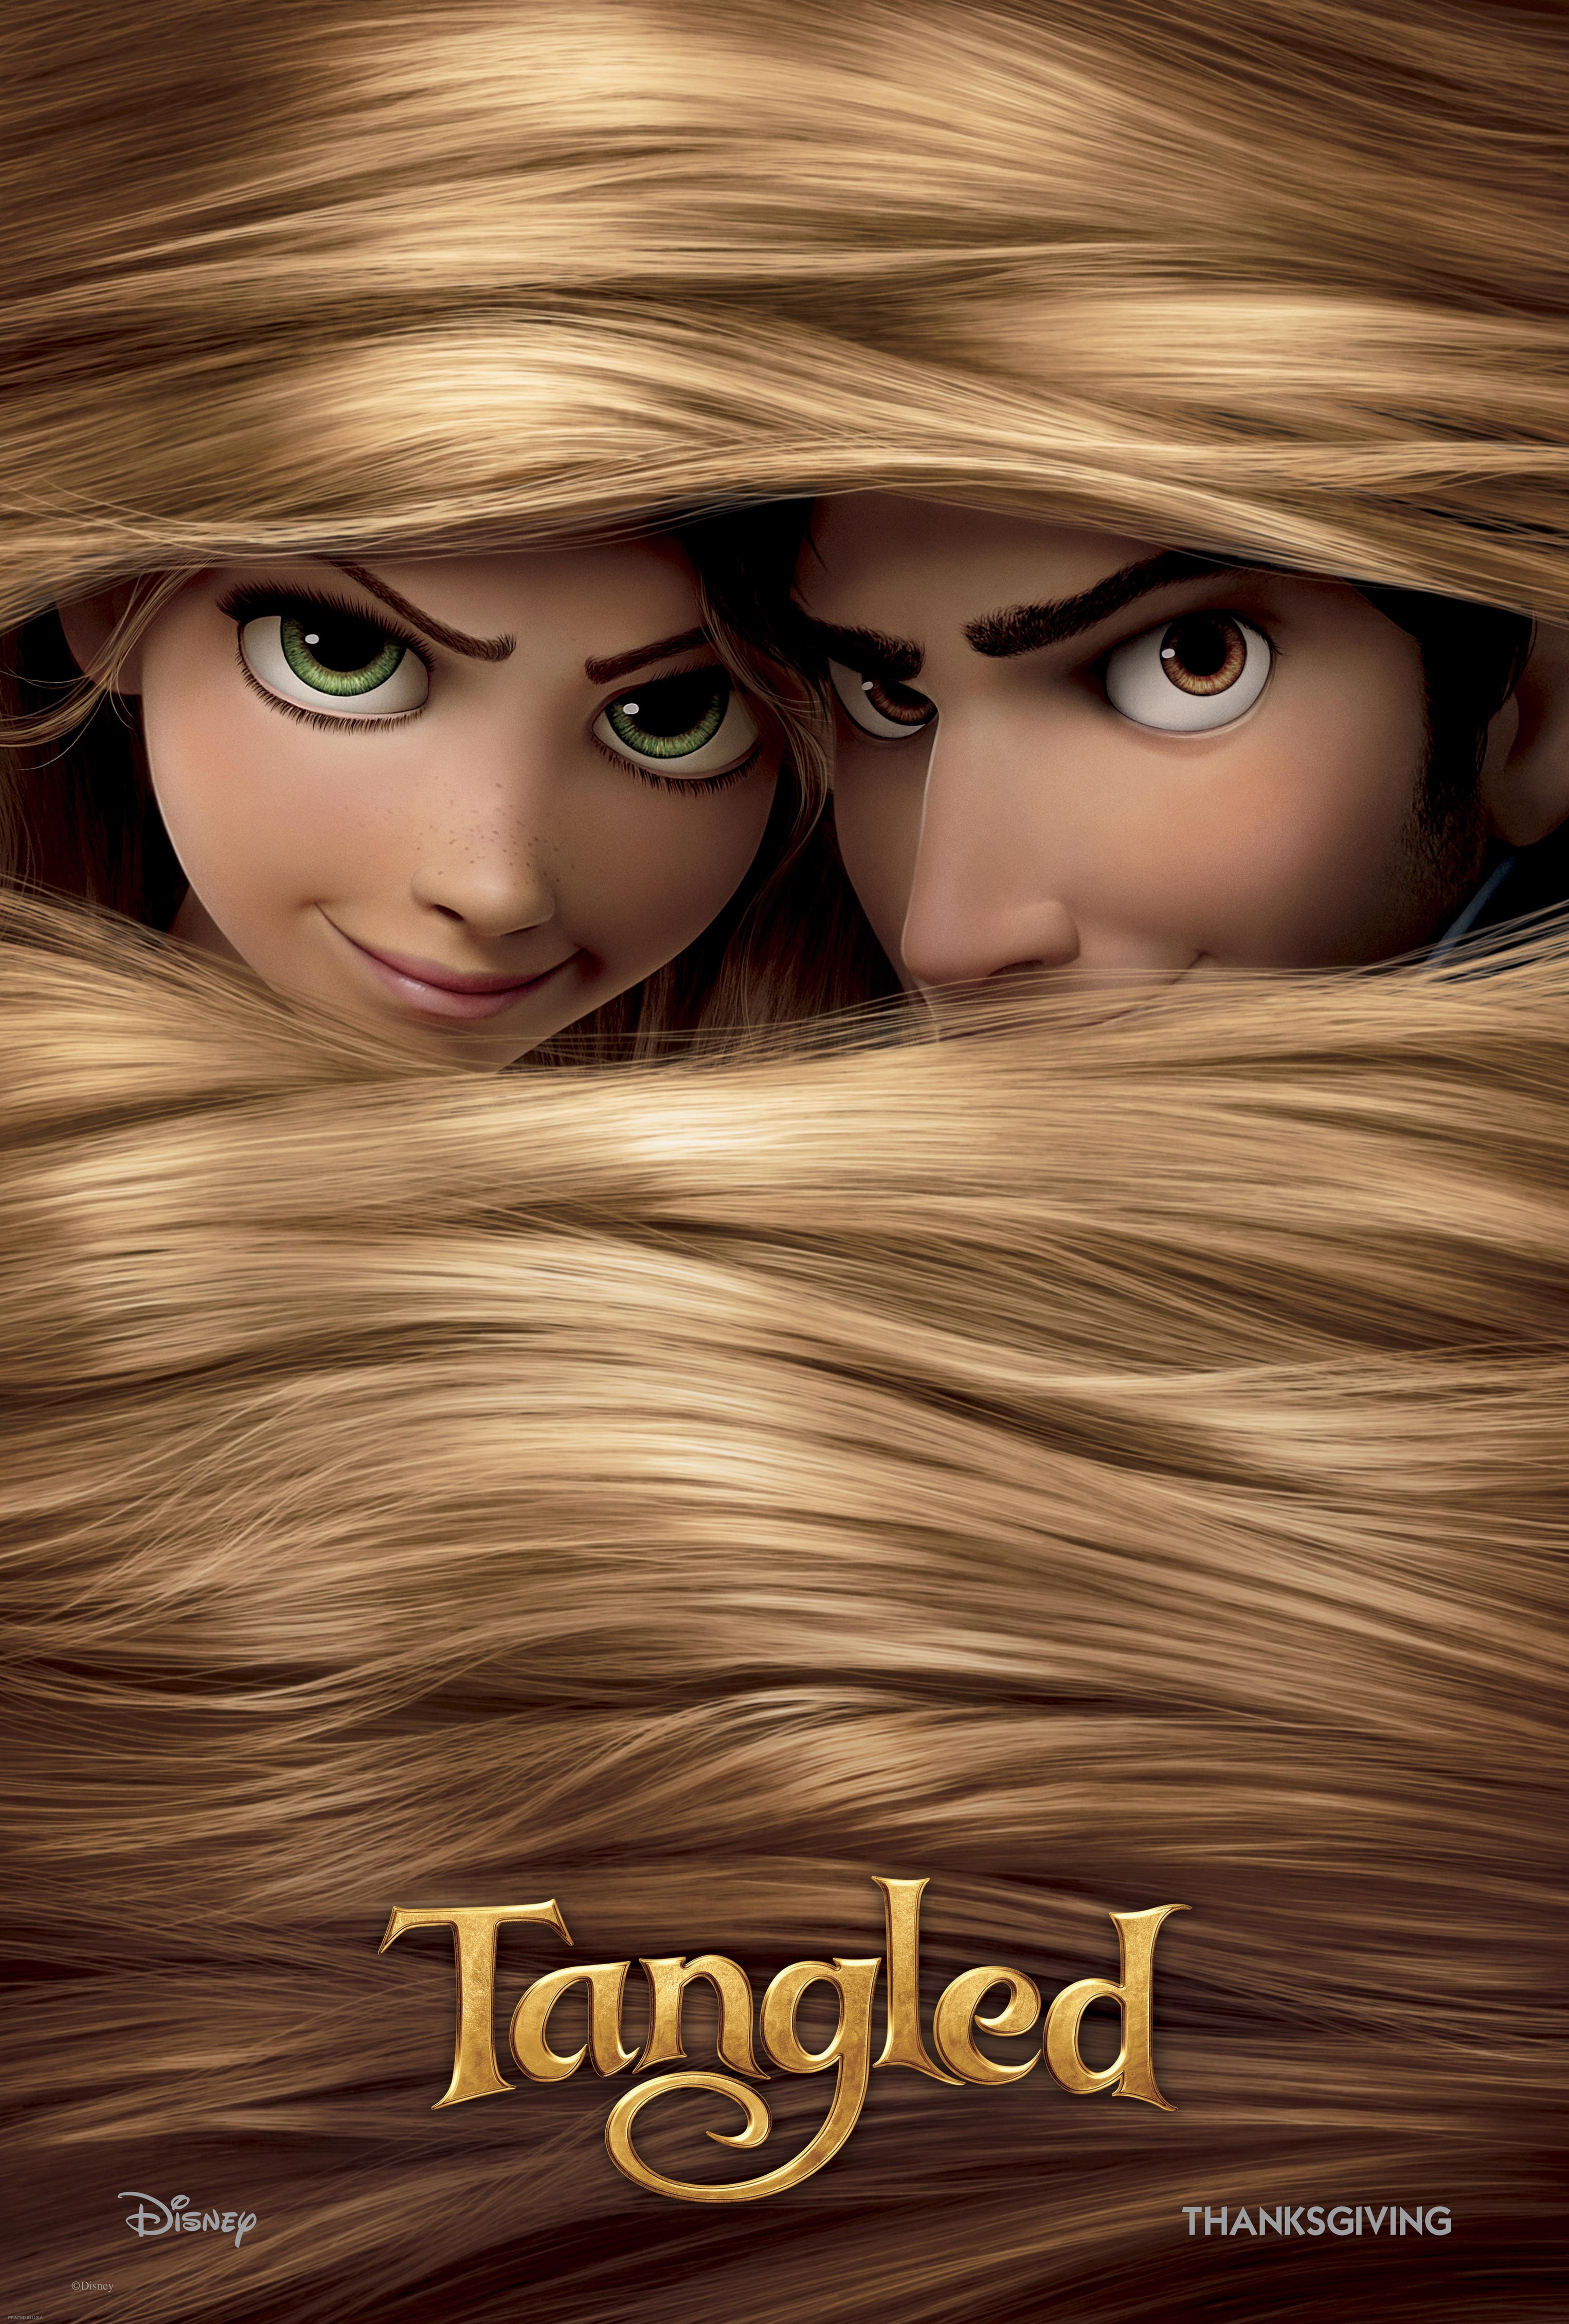 Tangled Wallpaper For iPhone